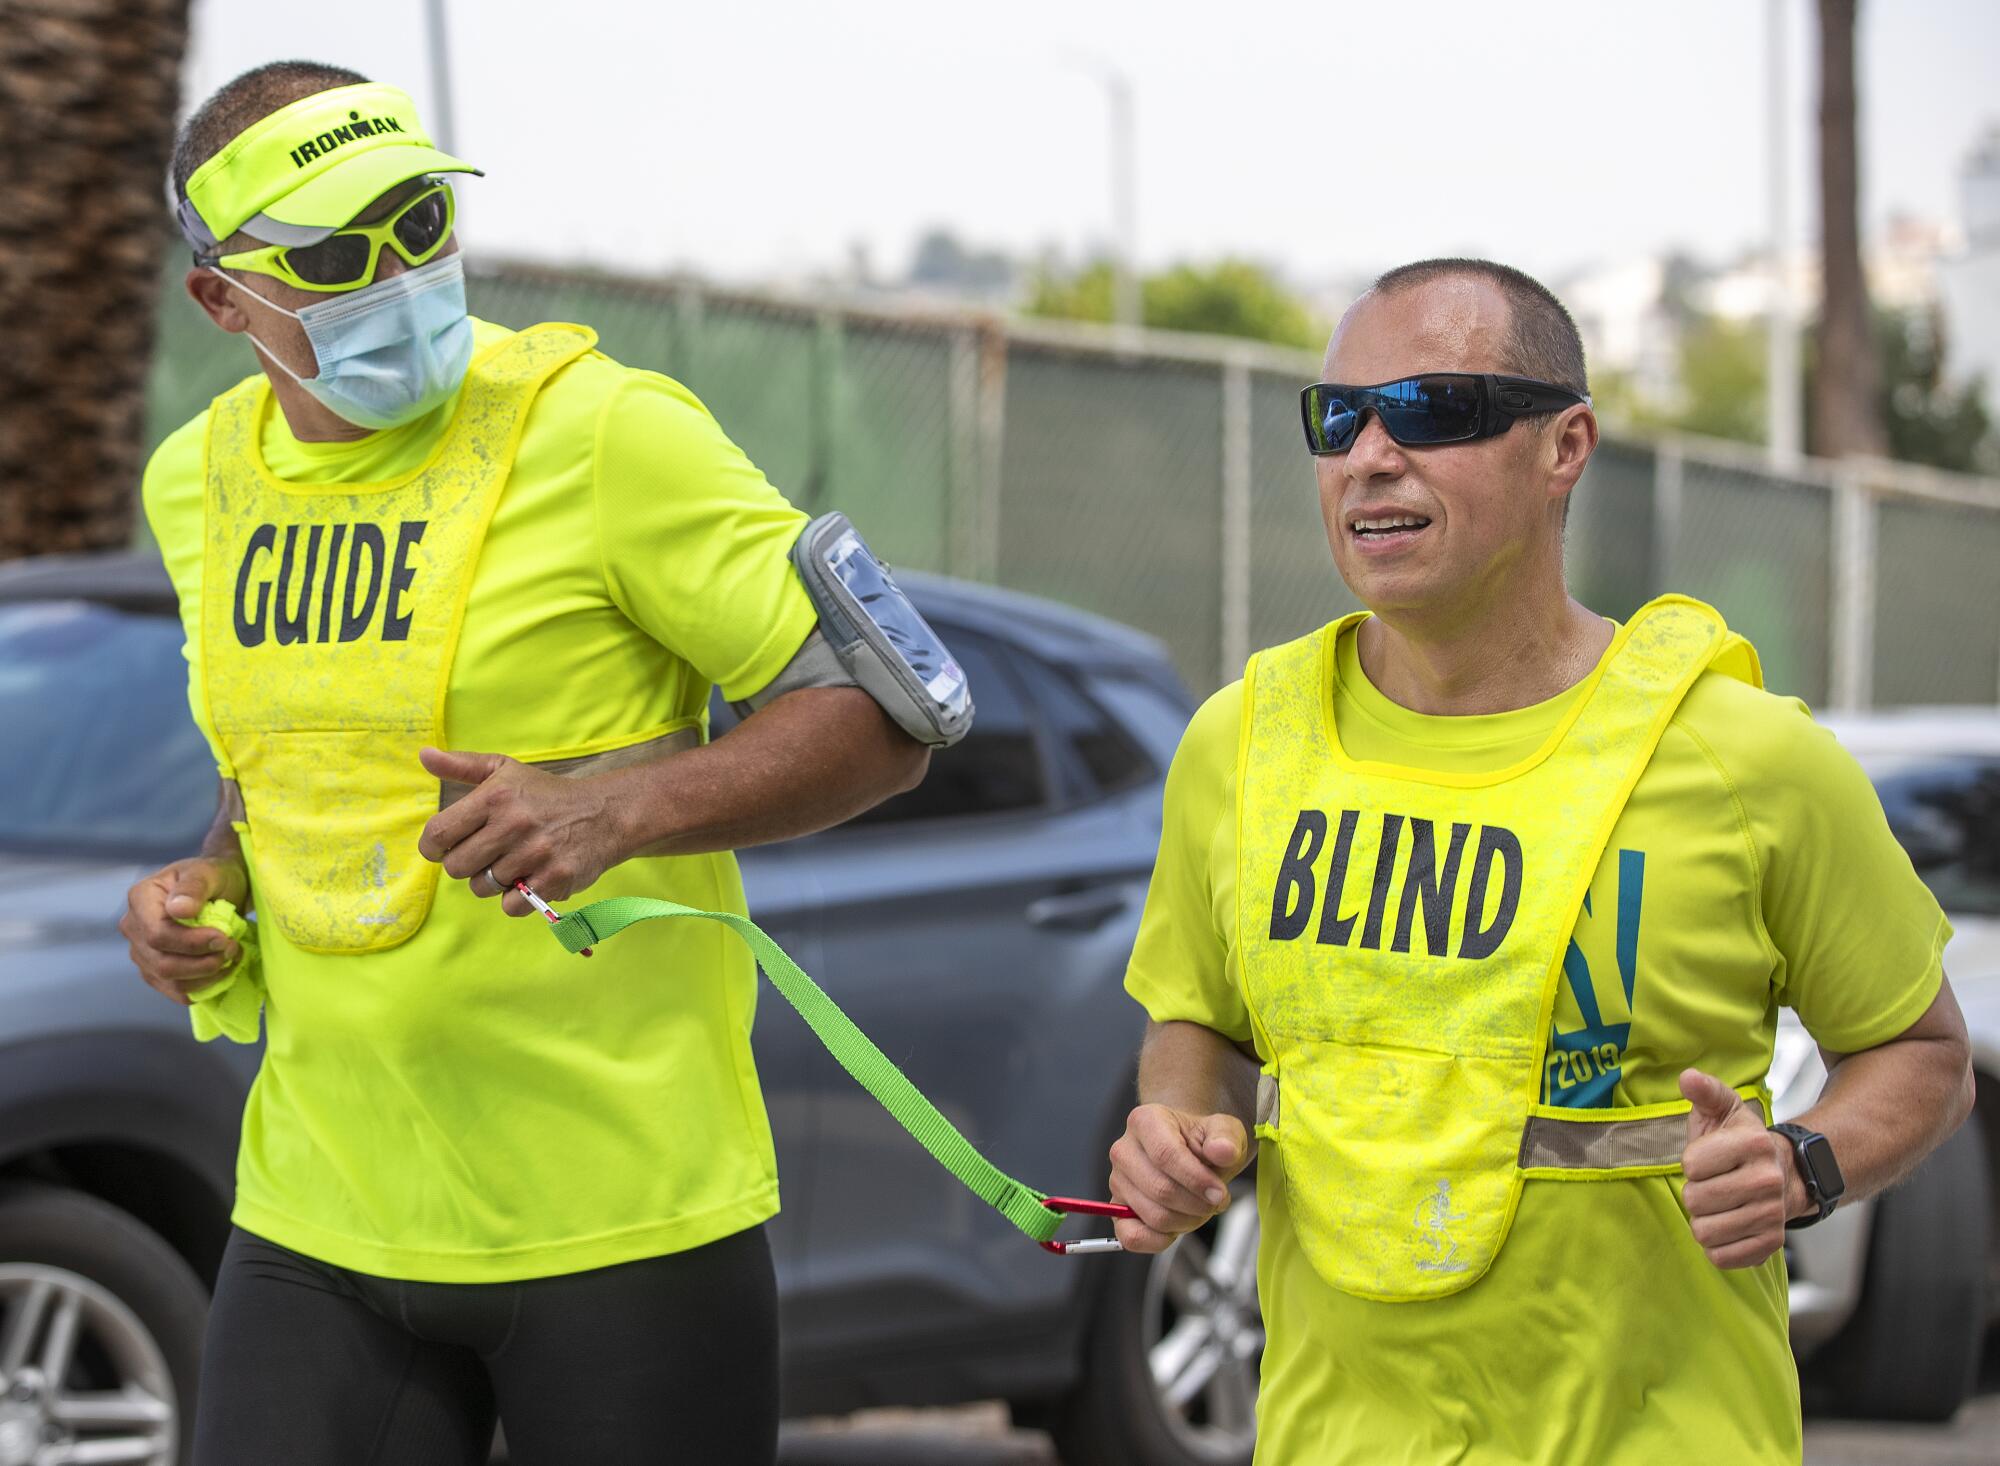 Tony Duenas, 53, right, a marathon runner who is blind, and his guide Ray Alcanter, demonstrate the technique they use